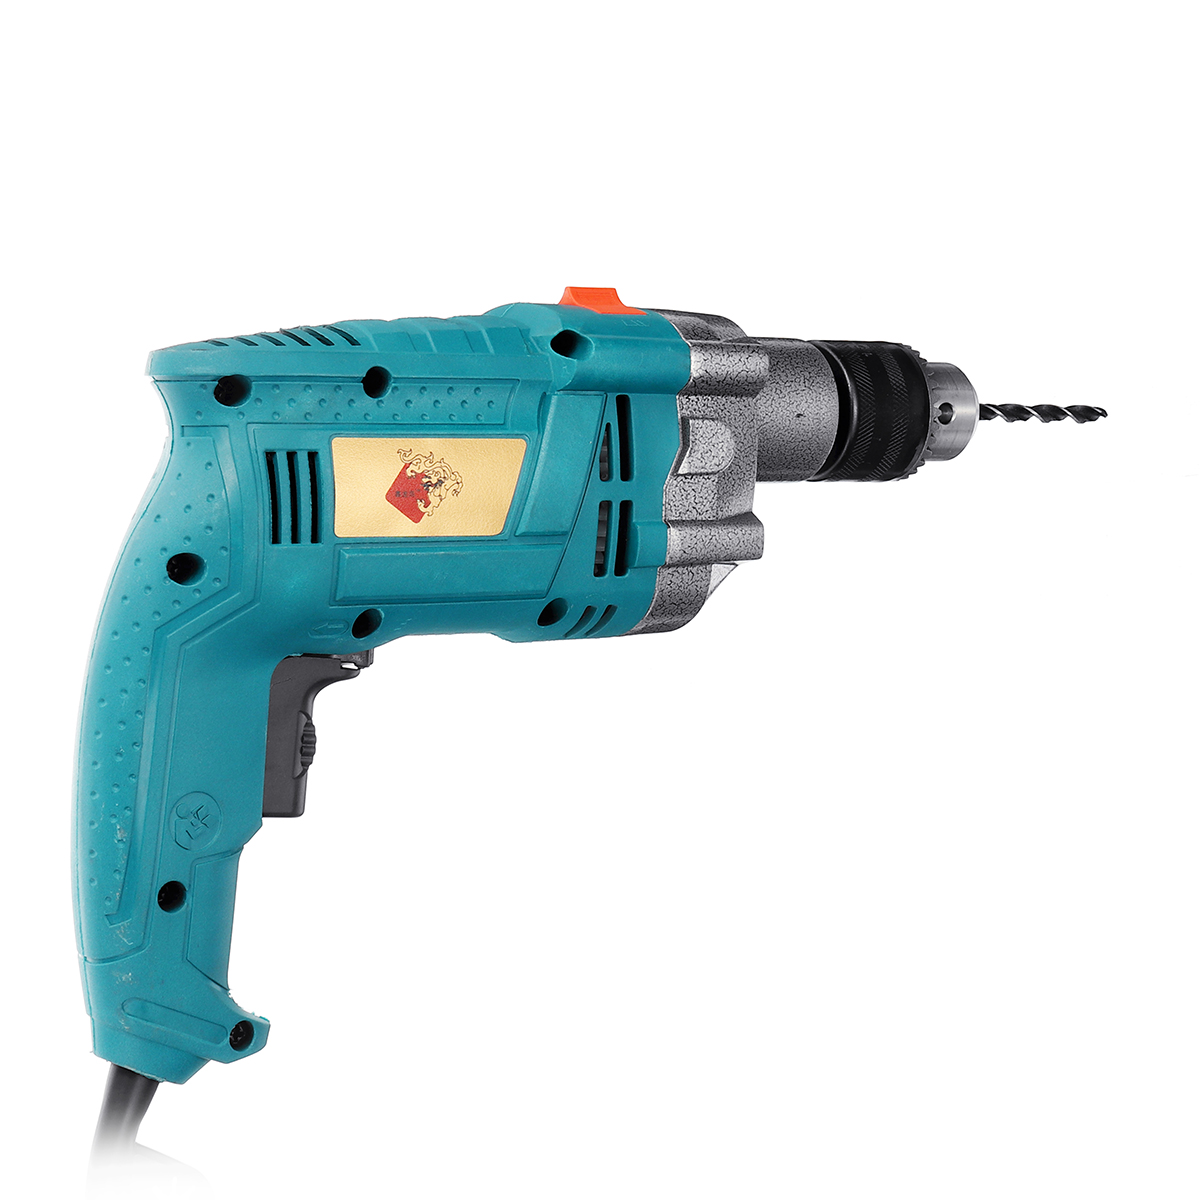 32Pcs-Set-1980W-3800RPM-Electric-Impact-Drill-Screwdriver-Household-Electric-Flat-Drill-Grinding-1466059-5